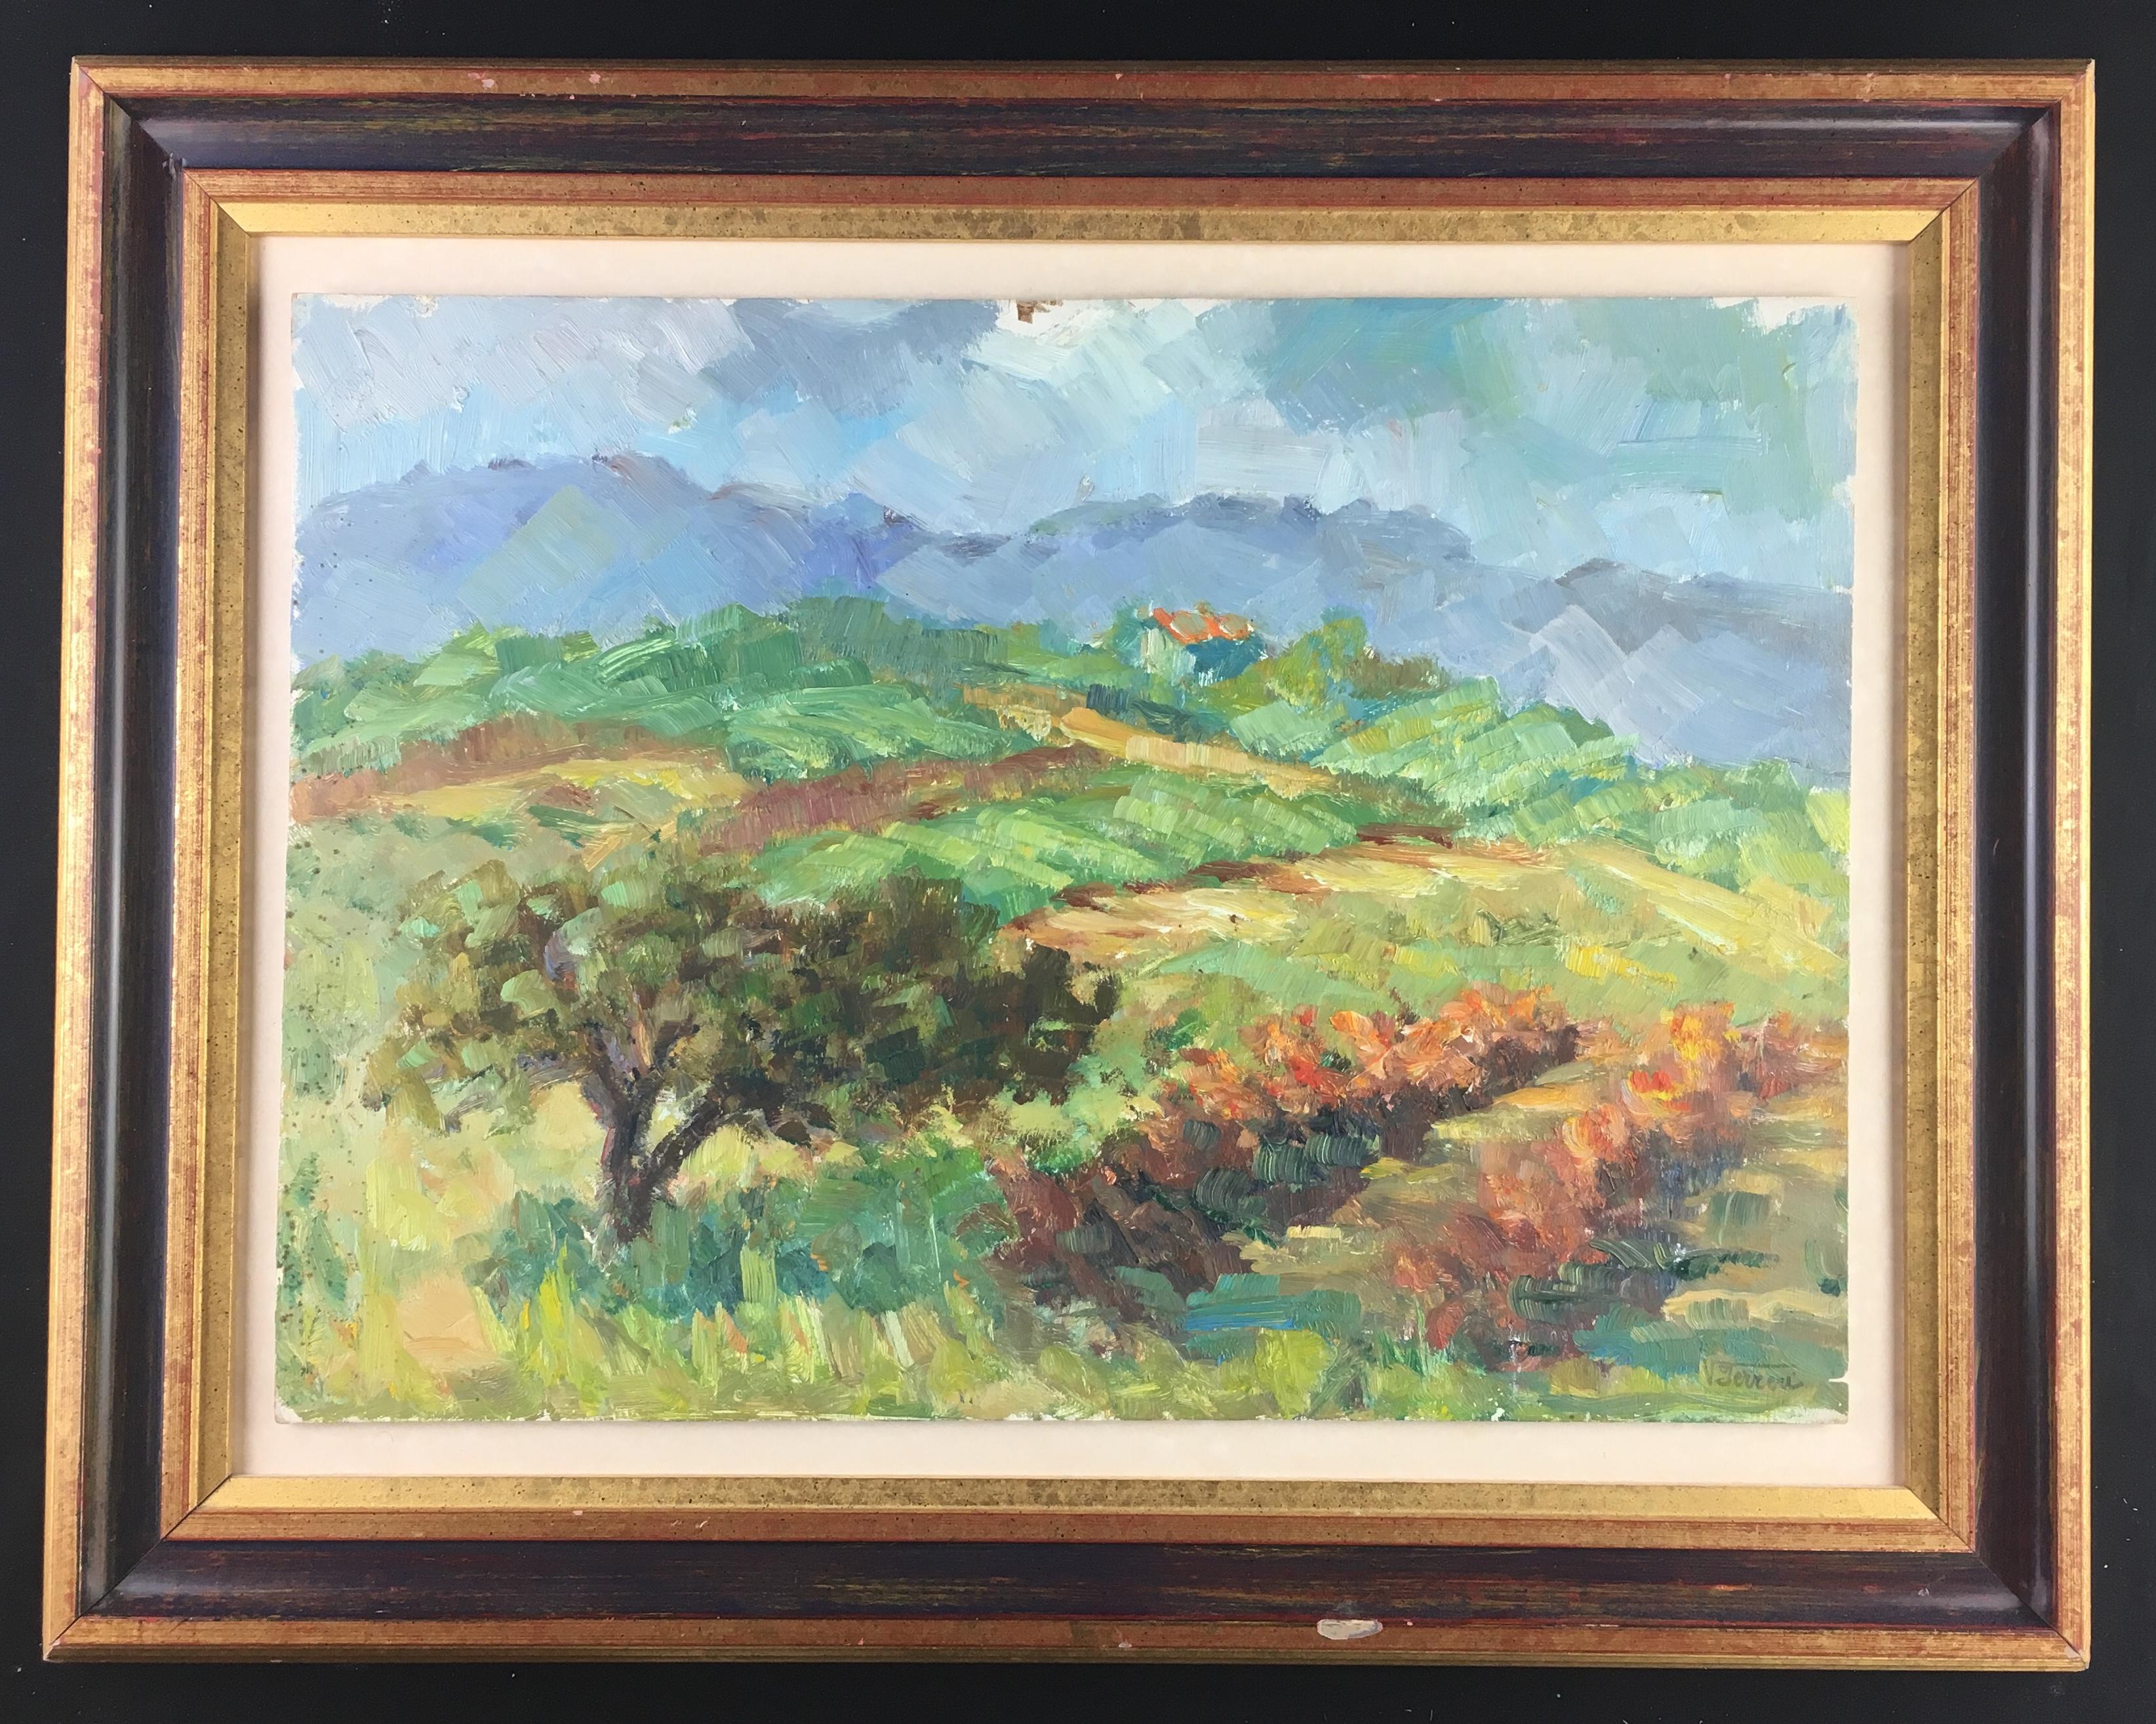 Beautiful original painting on isorel (board) depicting a typical Provençal landscape with its olive tree and hills. Very vivid colors just like the scenery in the region in spring and summer. 

The artist Victor Ferreri is a very well-known listed